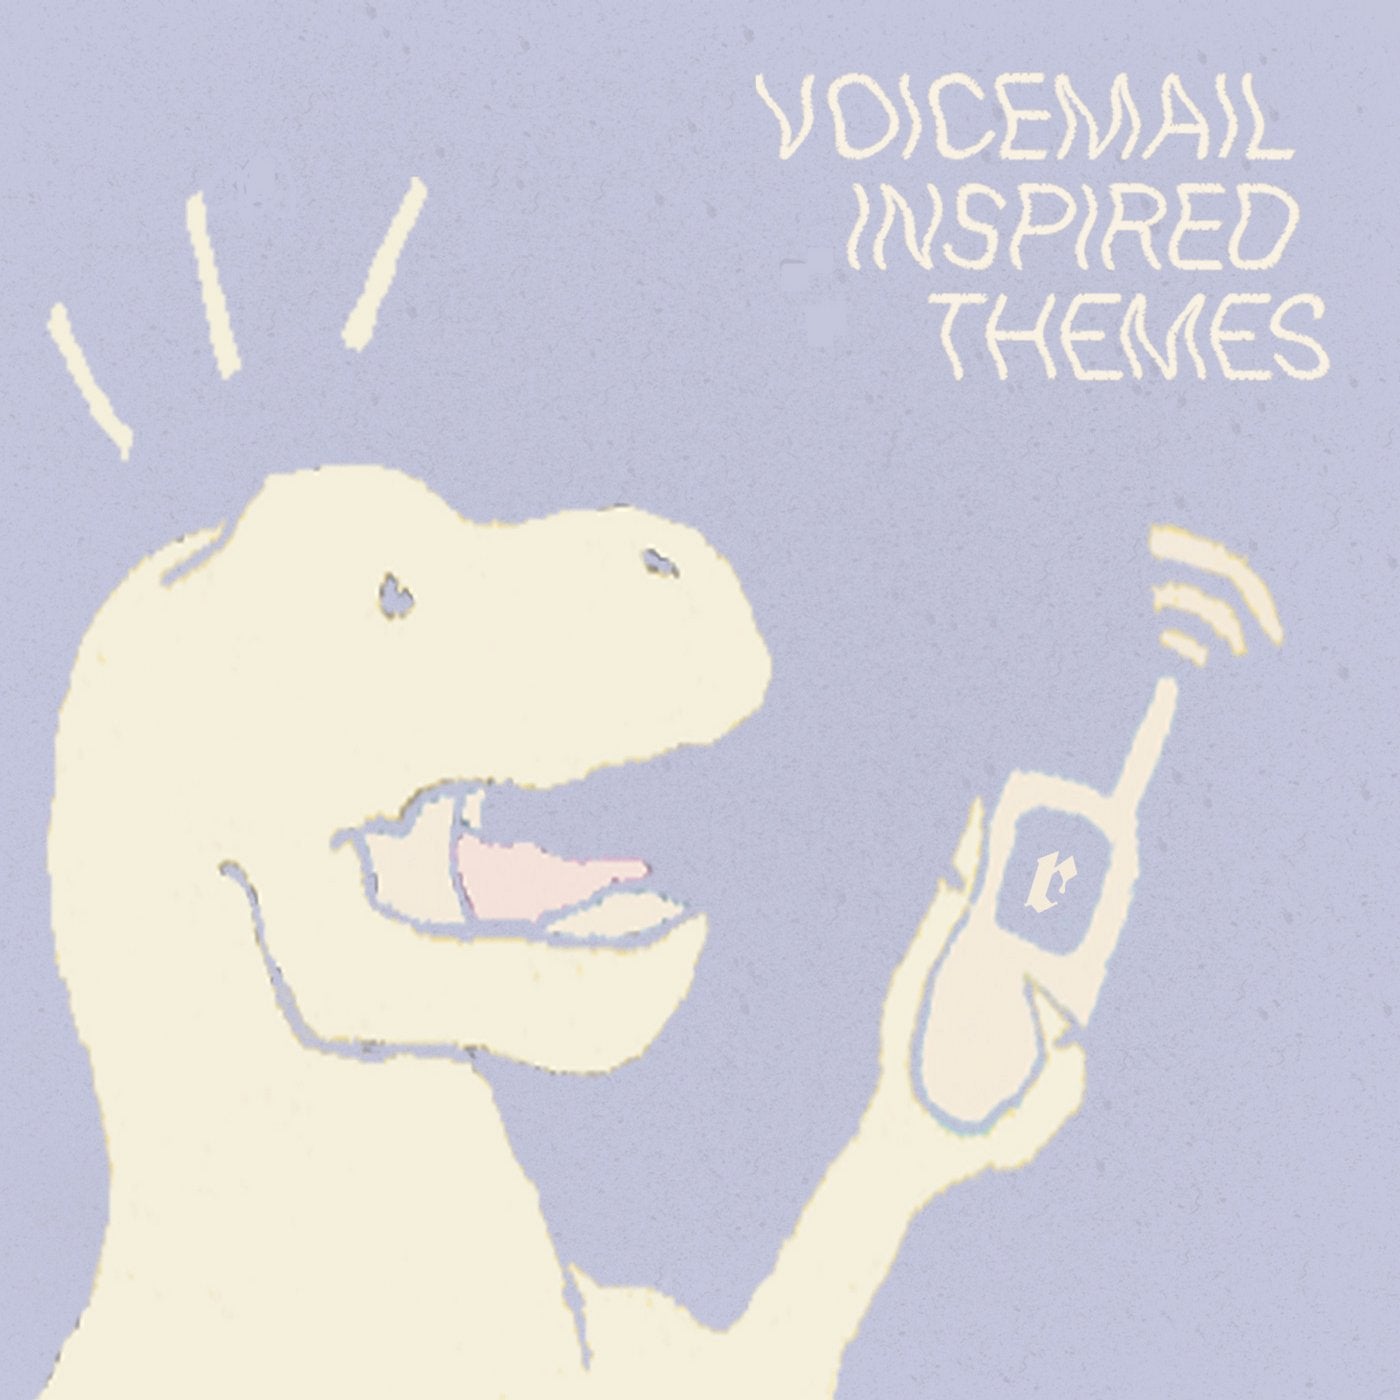 Voicemail Inspired Themes